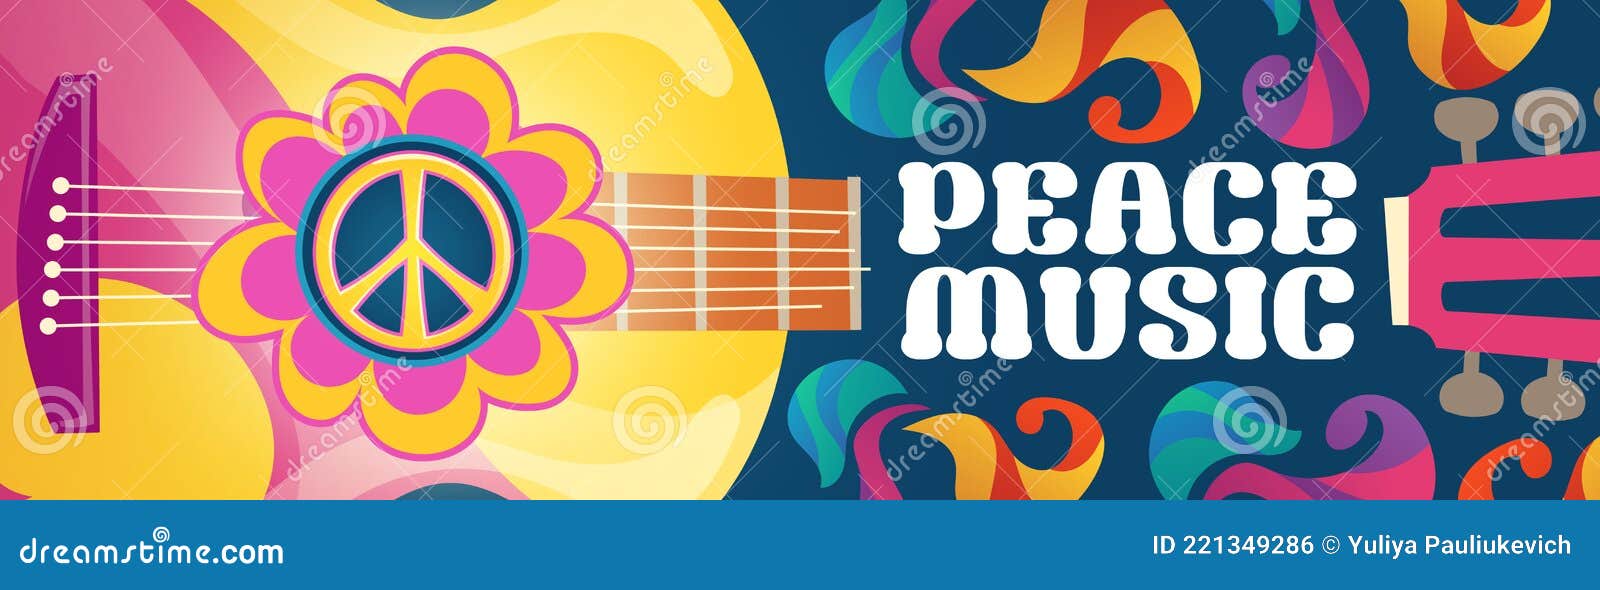 hippie music cartoon banner with acoustic guitar